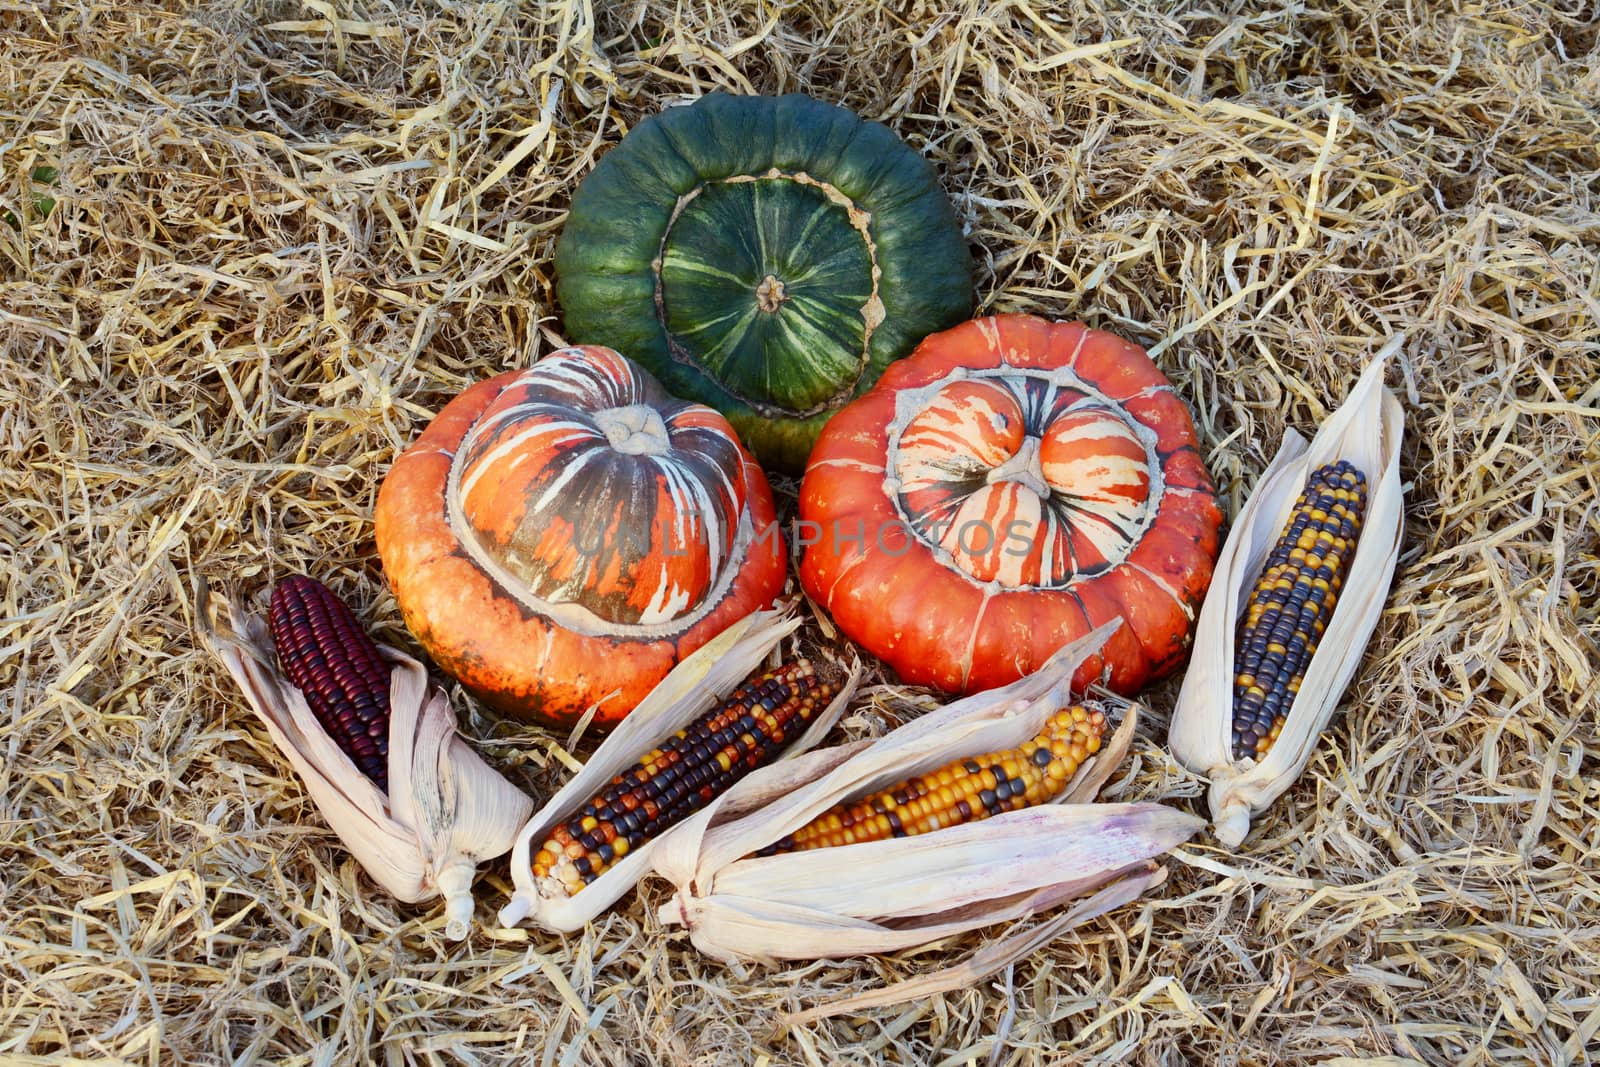 Autumnal display of Turks Turban gourds and ornamental sweetcorn by sarahdoow